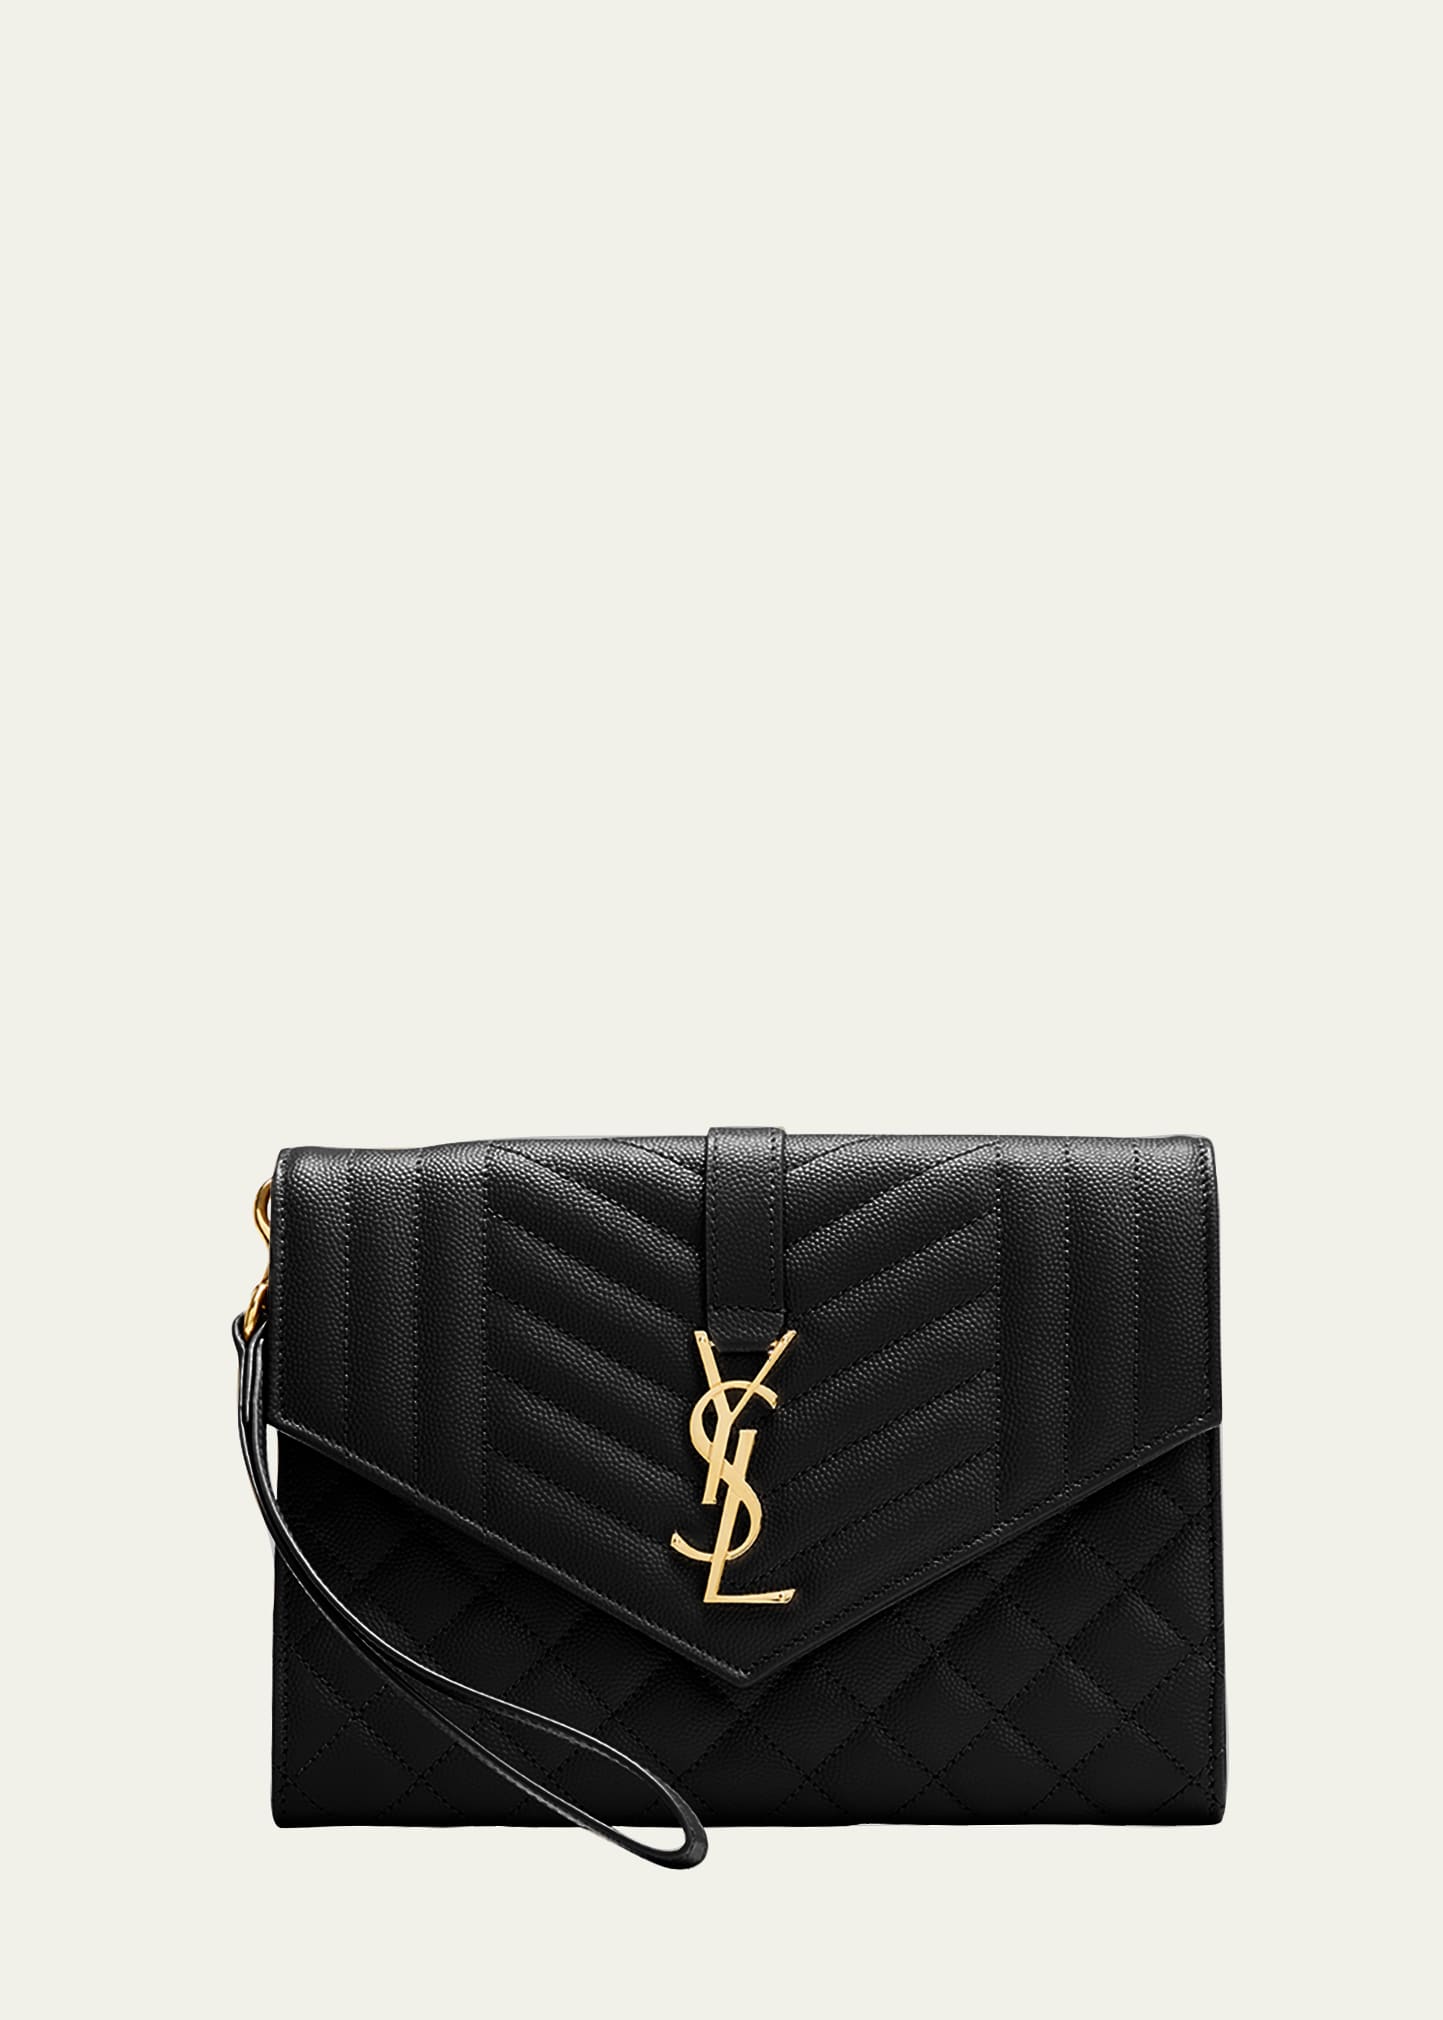 Envelope Flap YSL Clutch Bag in Grained Leather